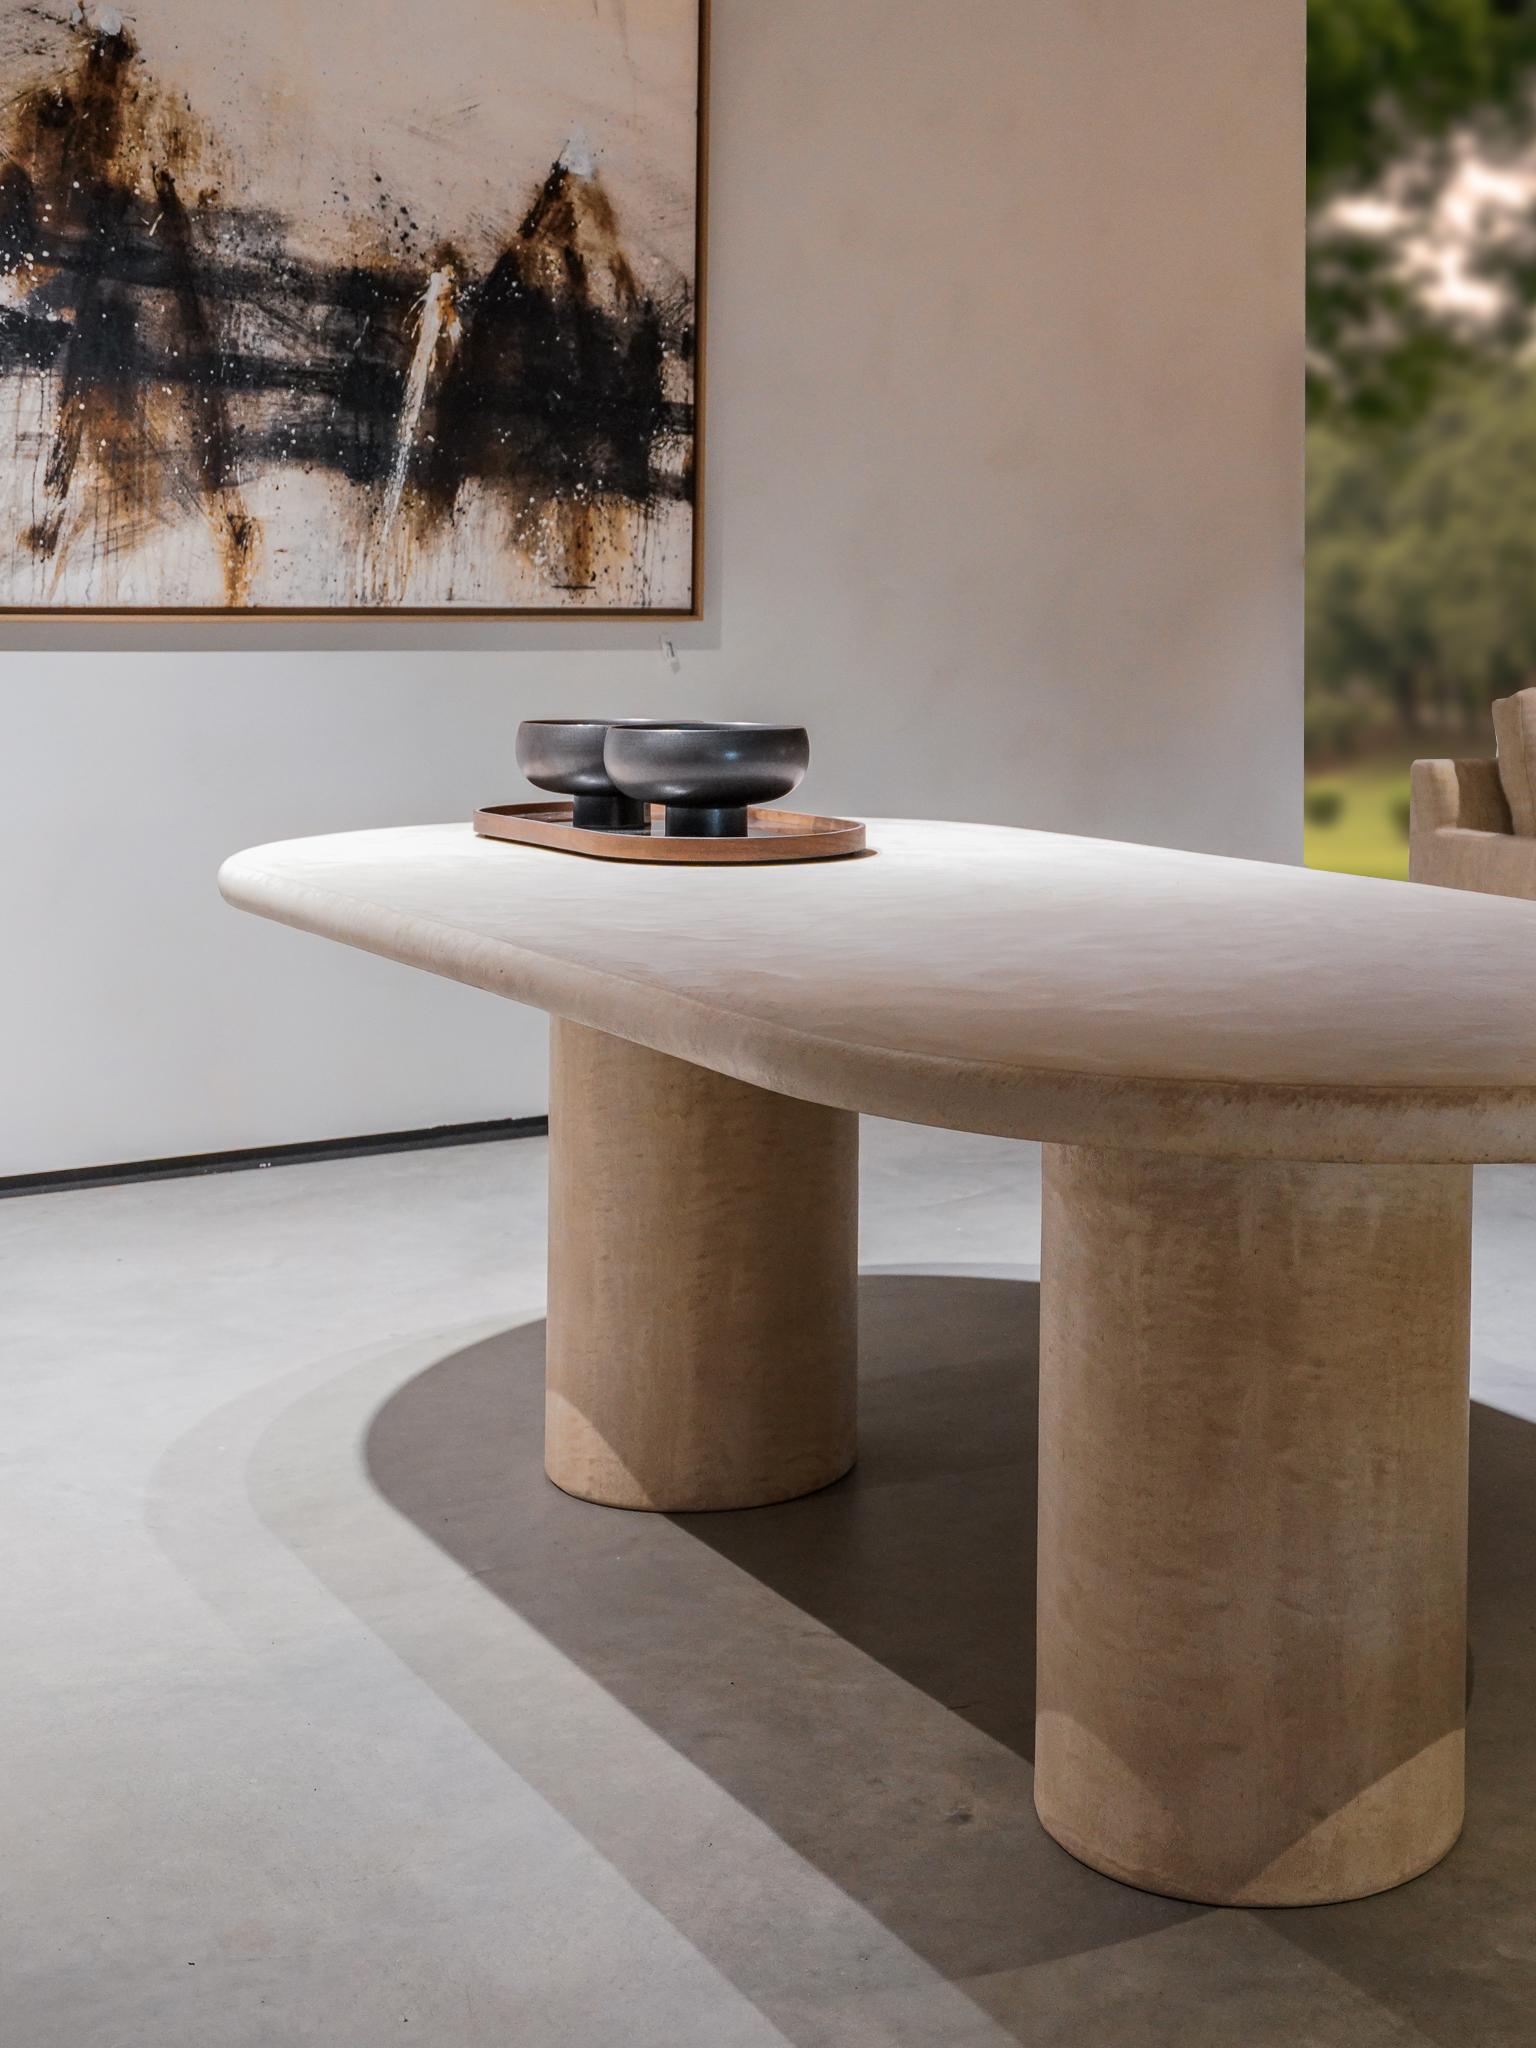 This Liz Table from the Callisto collection is a very present table because of the static symmetrical shape. 
The 50 mm thick top is massive with rounded edges and stands for quality and luxury. It's also a pleasure to sit and dine on , it feels